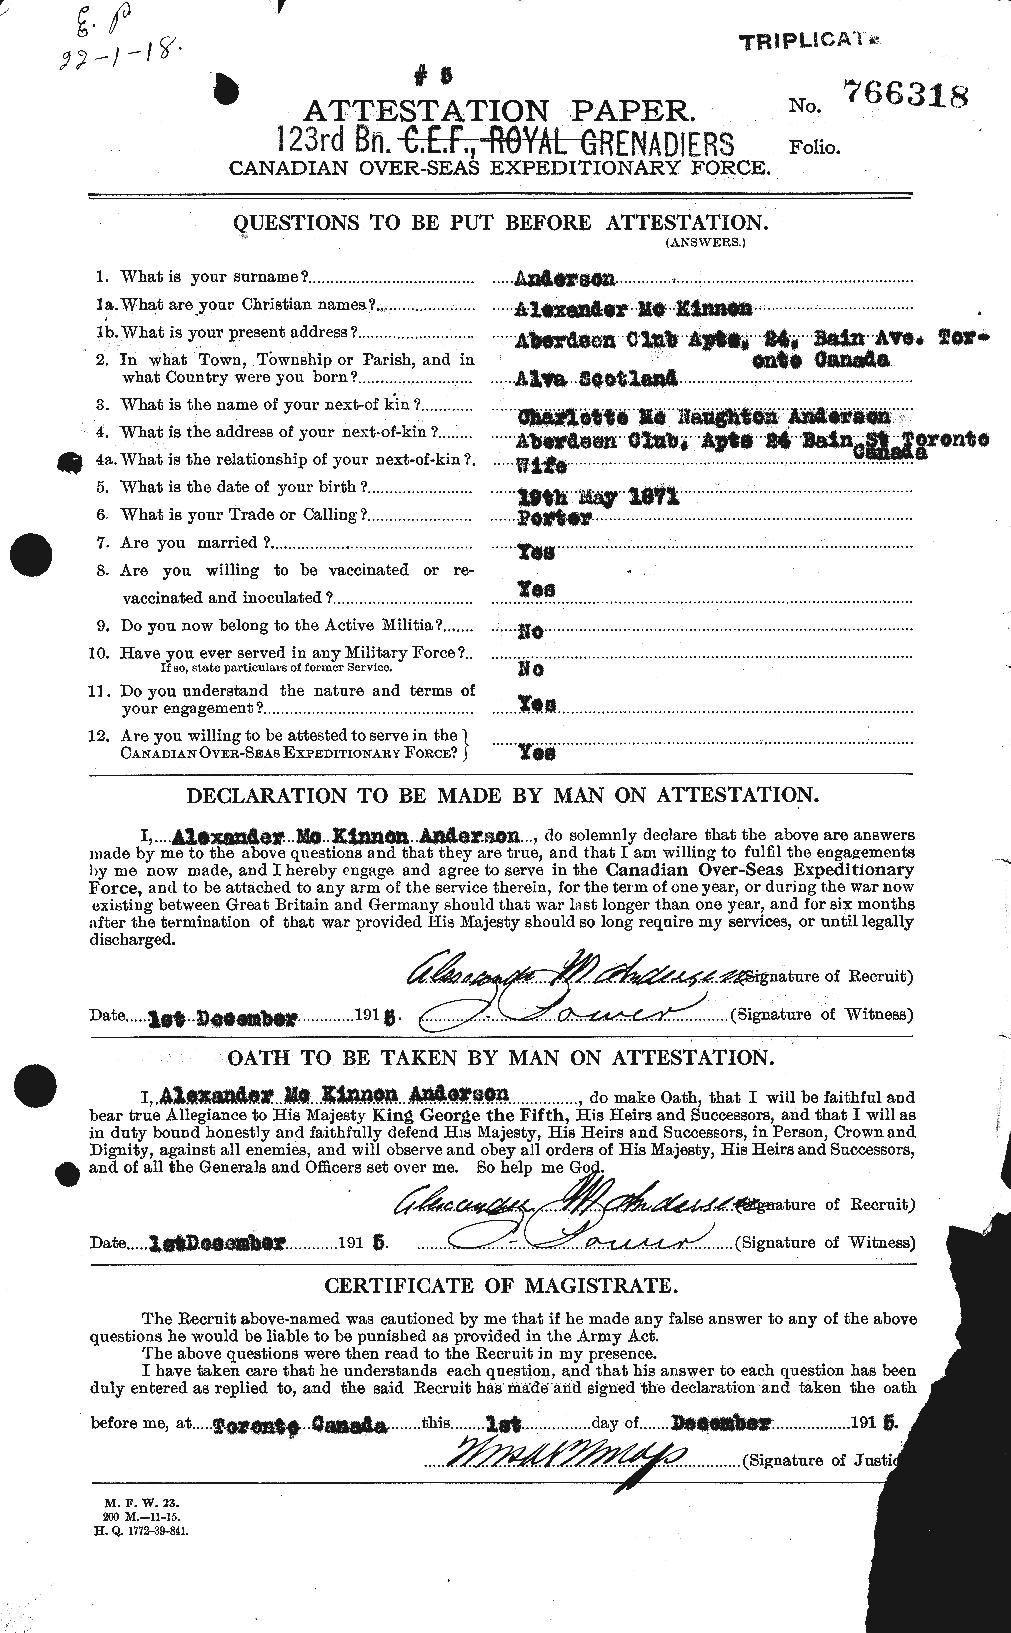 Personnel Records of the First World War - CEF 209479a